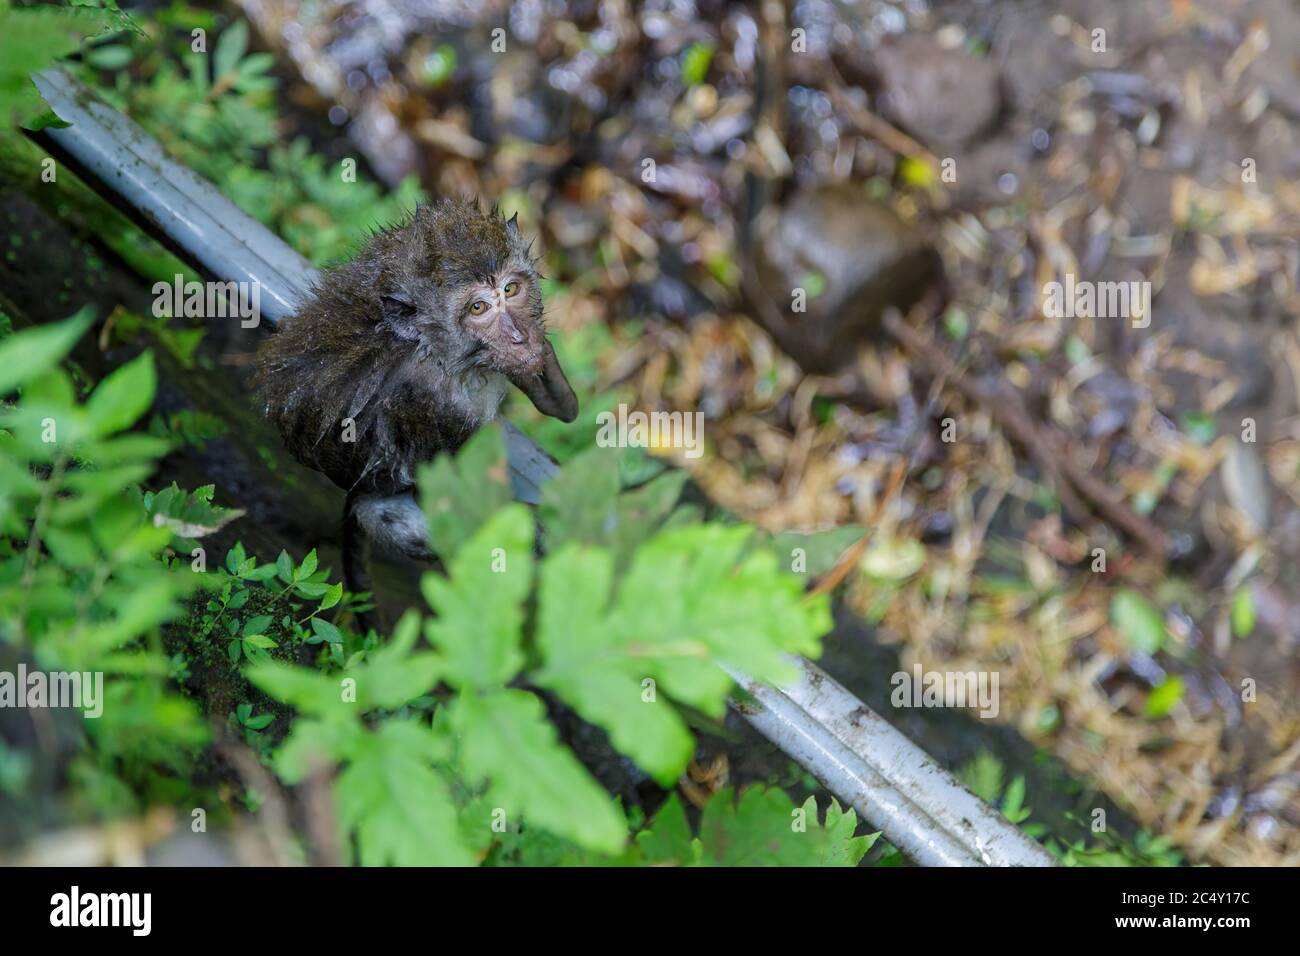 Wet monkey looking at the camera after taking a bath in a cold river. Concept of animal care, travel and wildlife observation. Stock Photo